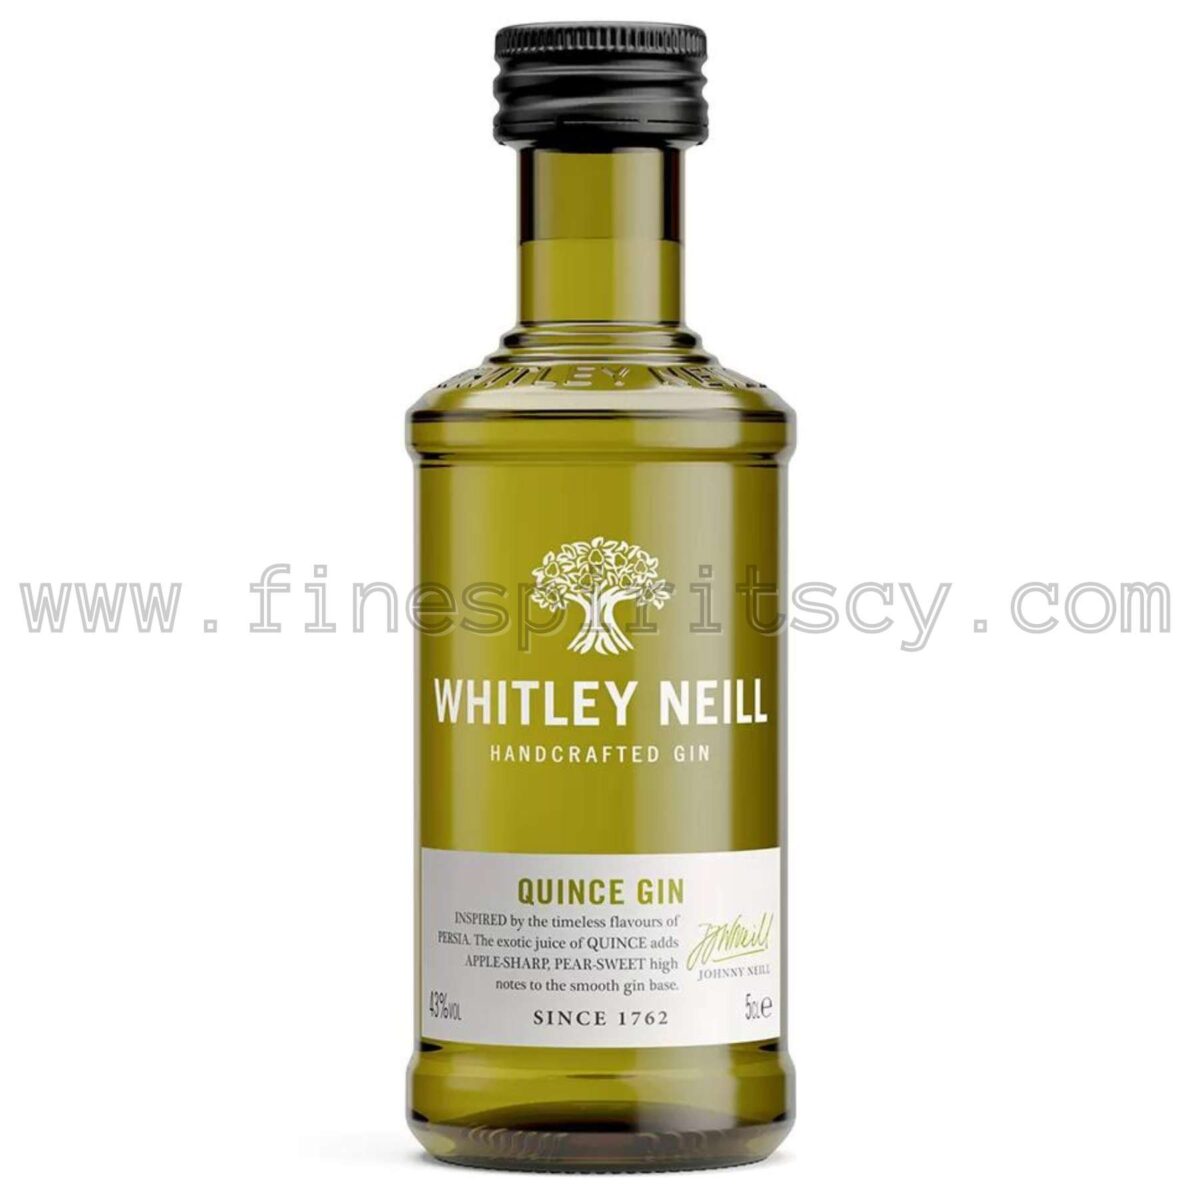 Whitley Neill Quince Gin 50ml 5cl mini miniature Price Cyprus Fine Spirits